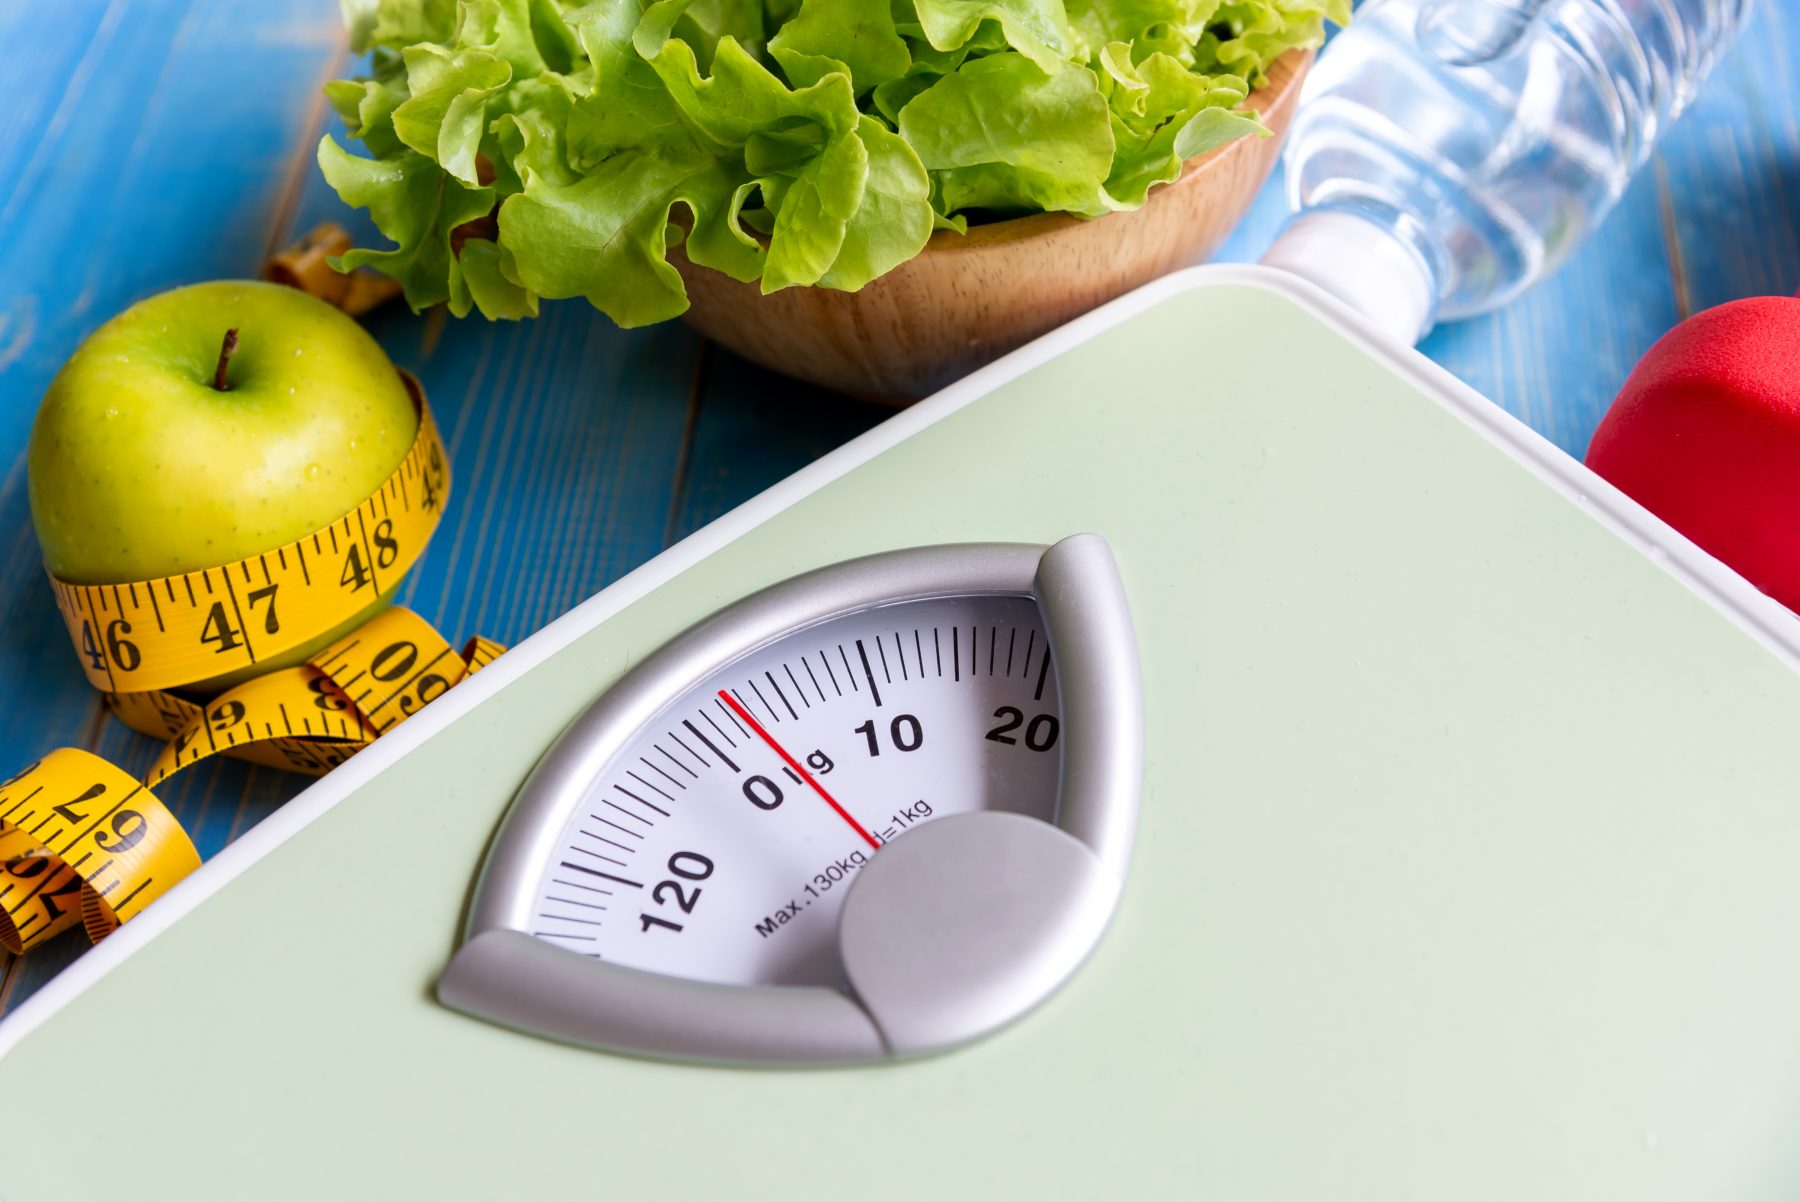 Scale and healthy food demonstrating weight loss